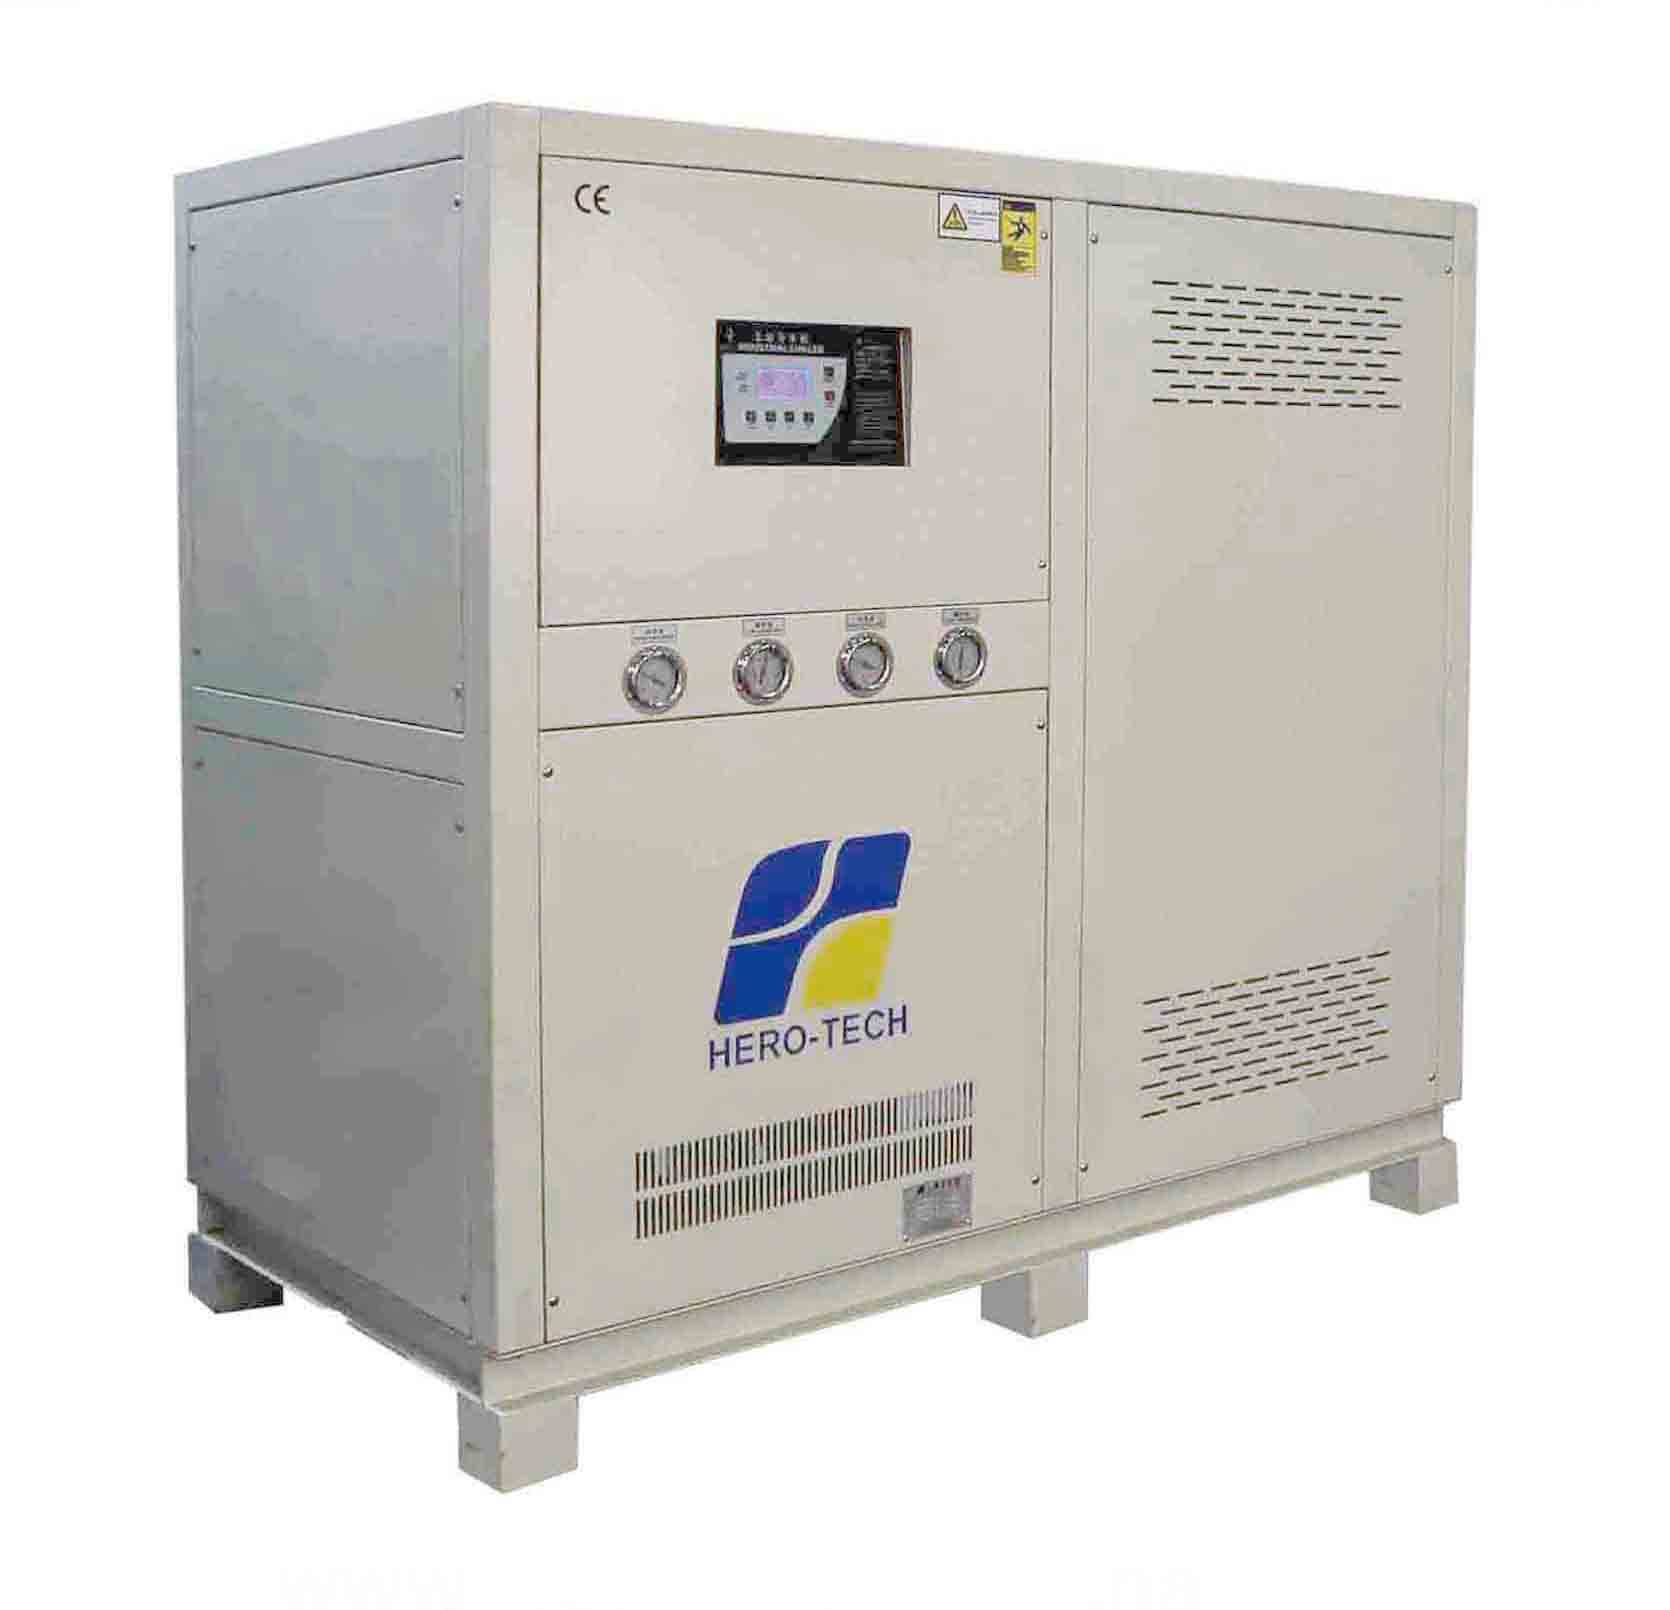 China Water Cooled Low Temperature Industrial Chiller Manufacturer And Supplier Hero Tech